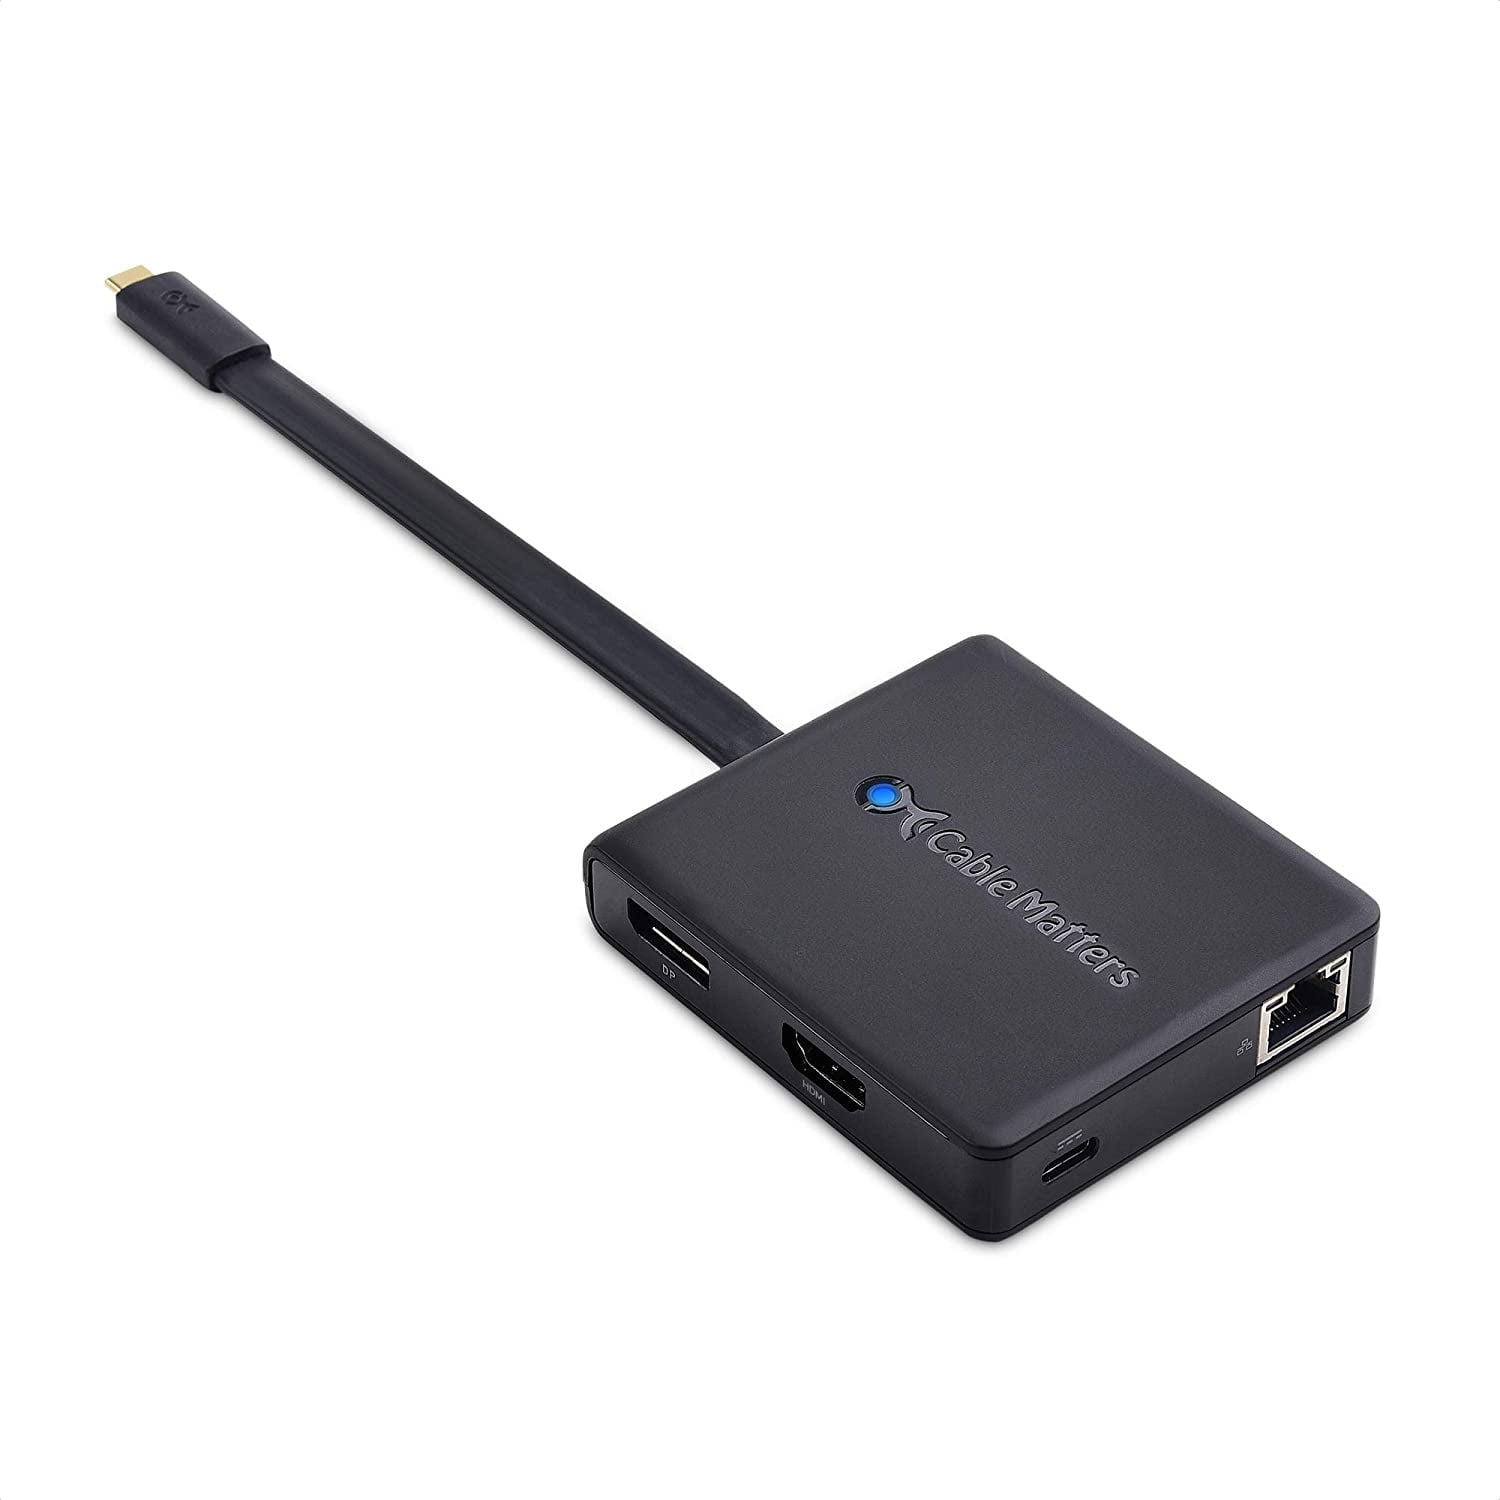 Mand Laptop Gemeenten Cable Matters USB C Hub with HDMI, DisplayPort, VGA, USB 2.0, Fast  Ethernet, 60W Charging - Thunderbolt 3 Port Compatible with MacBook Pro,  Dell XPS, HP Spectre x360 and More - Walmart.com